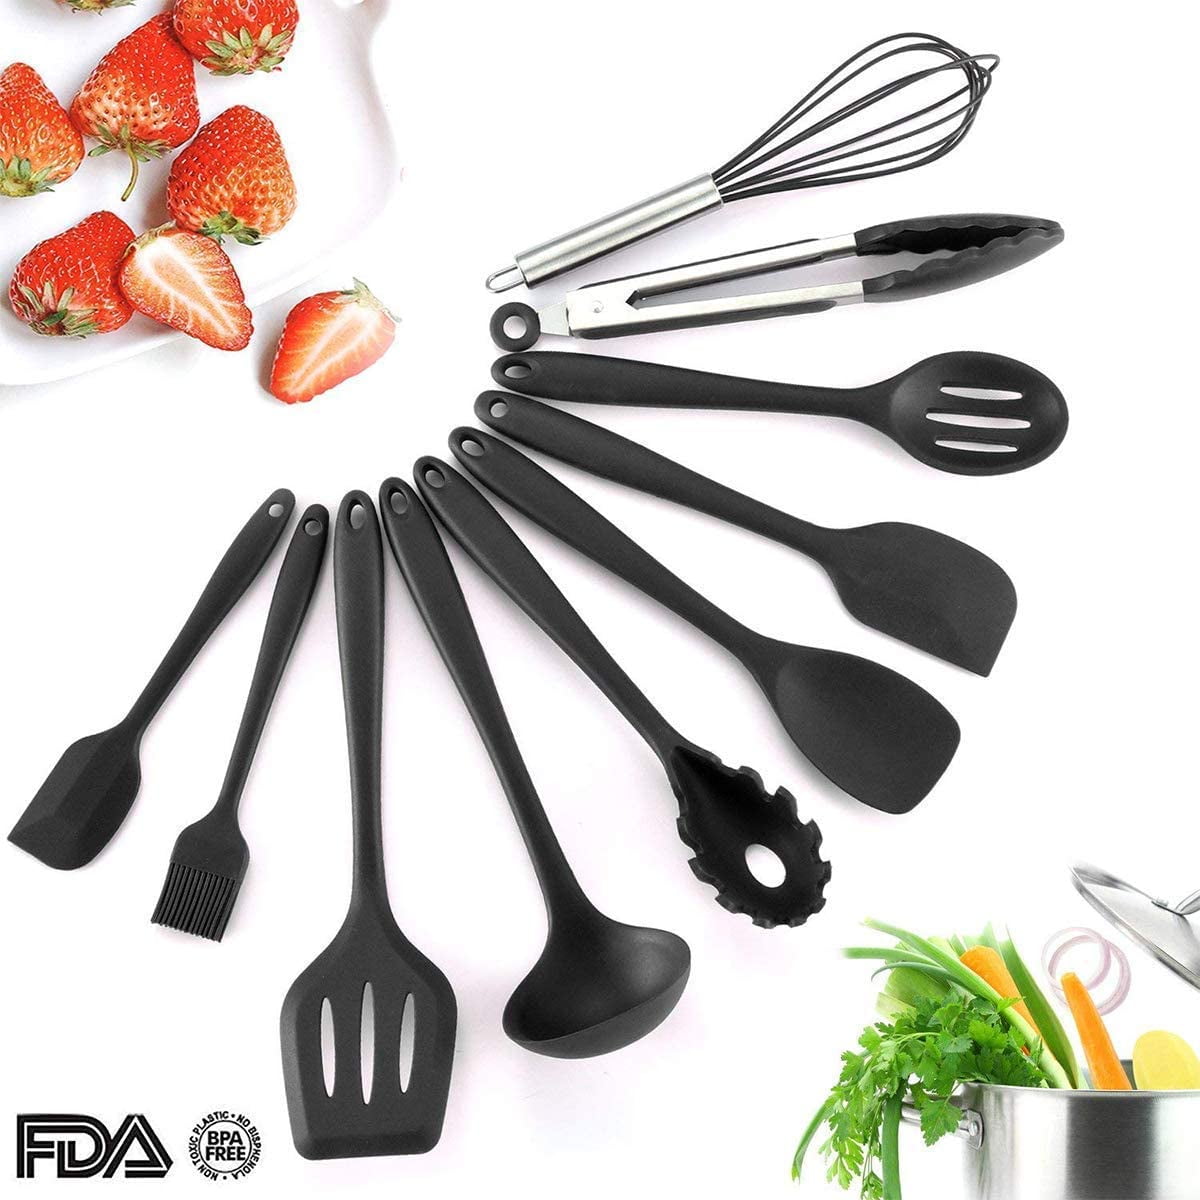 Kitchen Utensils Silicone Heat Resistant Cooking Utensil Non-Stick Set 10 Piece Cooking Set Kitchen Tools Turner Whisk Black Ladle Slotted turner Tongs Pasta Fork Spoon,Brush,spatula 